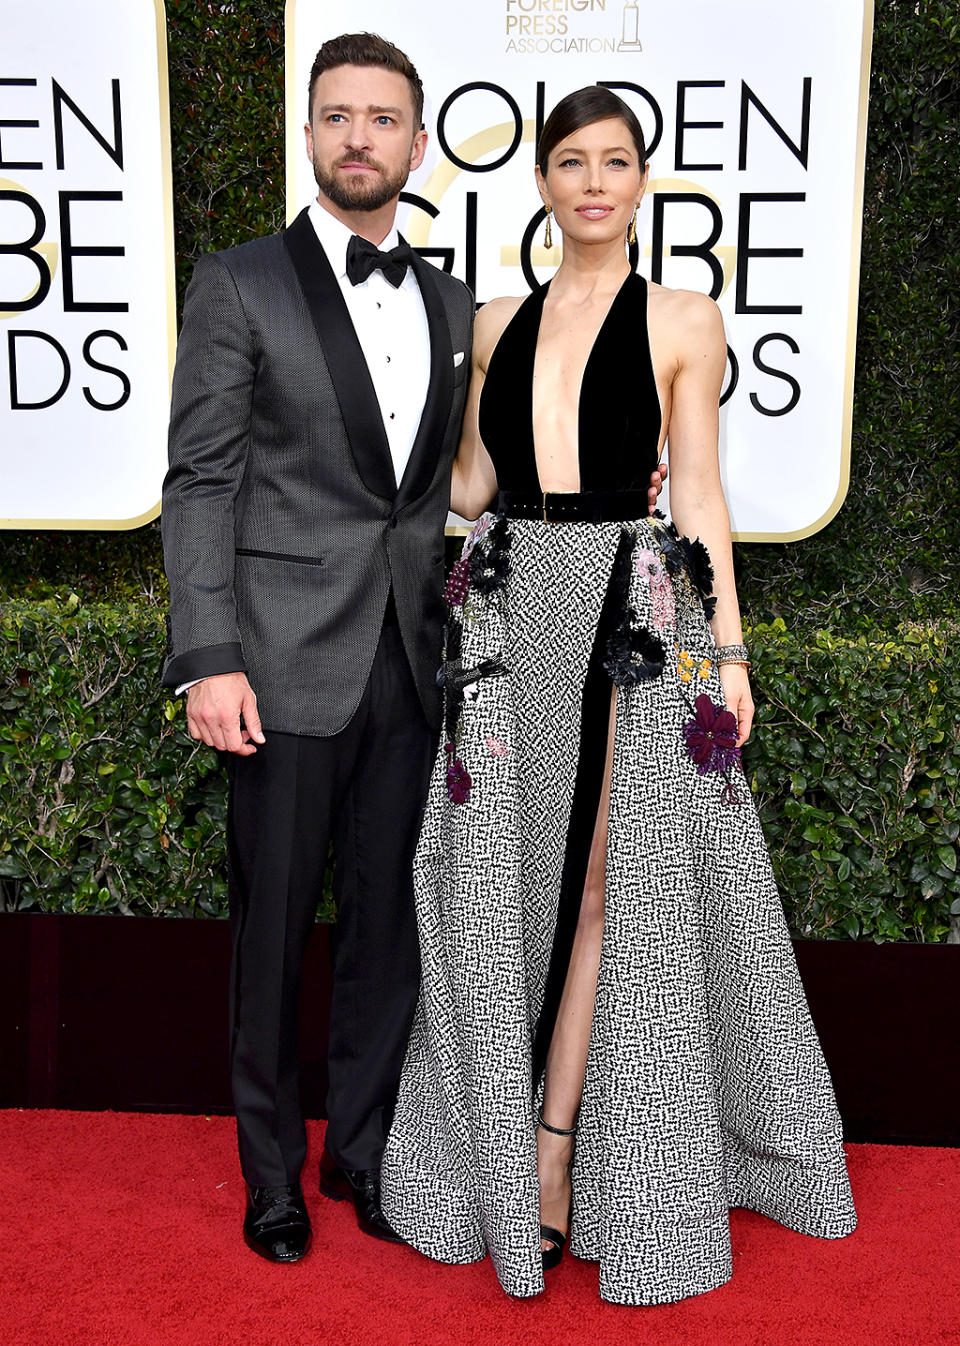 <p>Singer Justin Timberlake, left, and actress Jessica Biel attend the 74th Annual Golden Globe Awards at The Beverly Hilton Hotel on January 8, 2017 in Beverly Hills, California. (Photo by Steve Granitz/WireImage) </p>